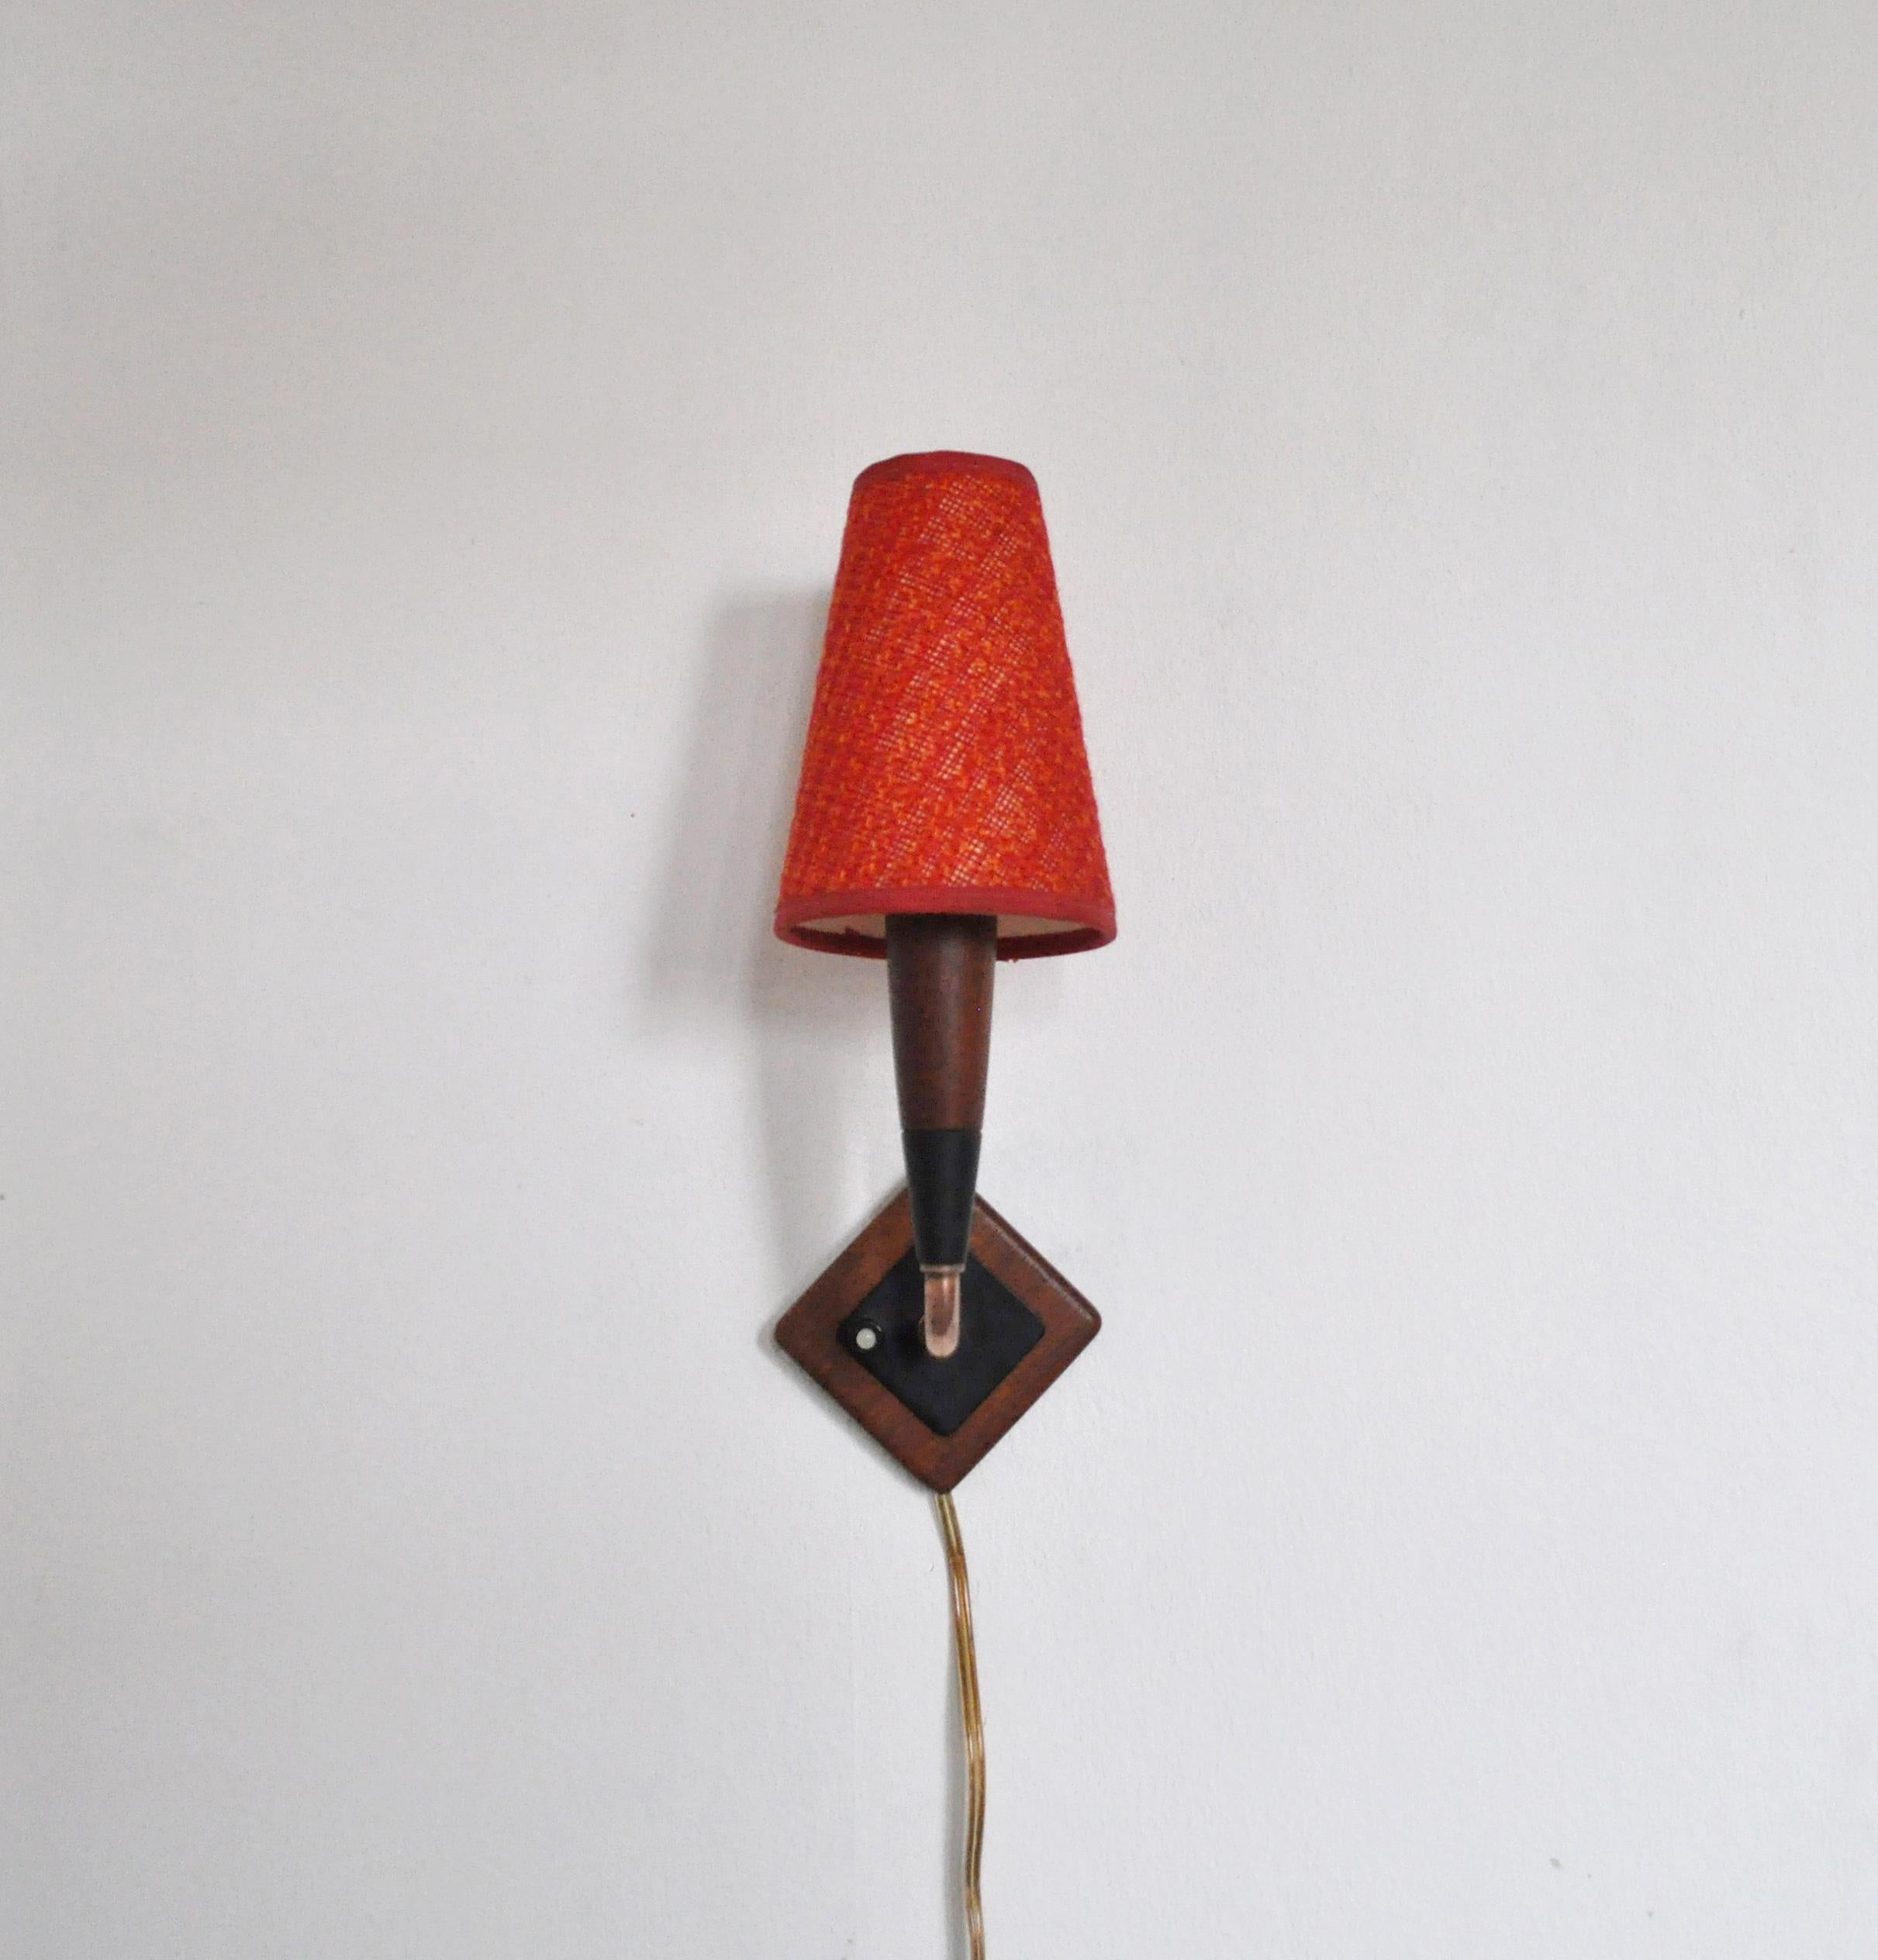 Mid-Century Modern teak and copper wall sconce with red textile shade, Denmark the 1950s. Shade in original condition without color fading.
Good vintage condition.

Dimensions:
Lamp height: 17,5 cm
Lamp base width and depth: 10,5 x 10,5